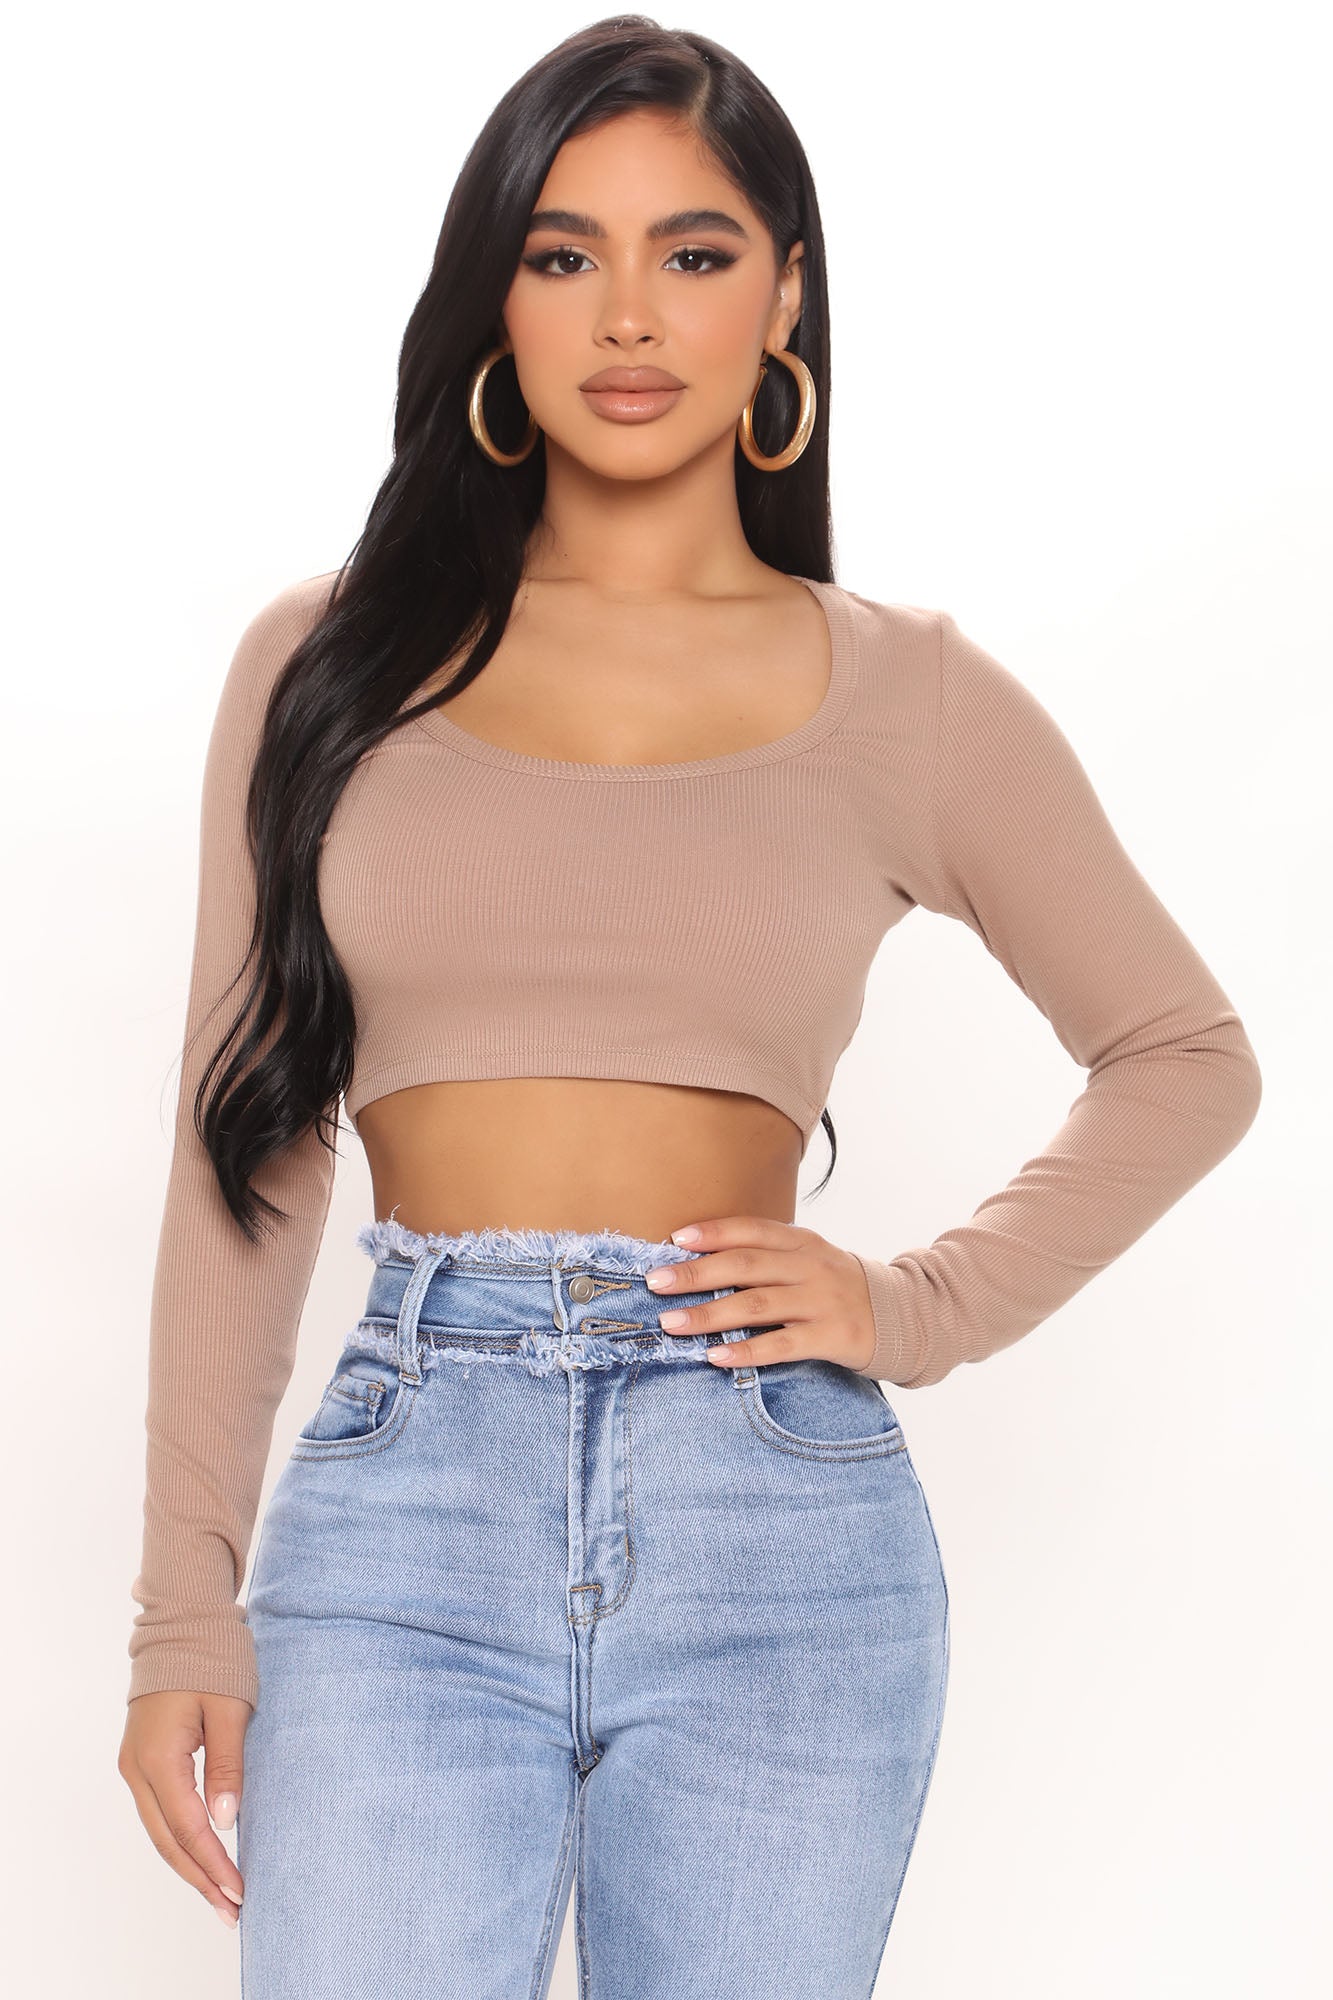 ssy clo on Instagram: Best tops for small bust😍😍.. #best #tops #for # small #bust #fashionposts #loveforfashion #fashionnow #outfitideas  #outfitinspo #liketkit #clothes #vintageclothes #fashiongoals #styleclothes  #aestheticpage #sassygirl #feminine